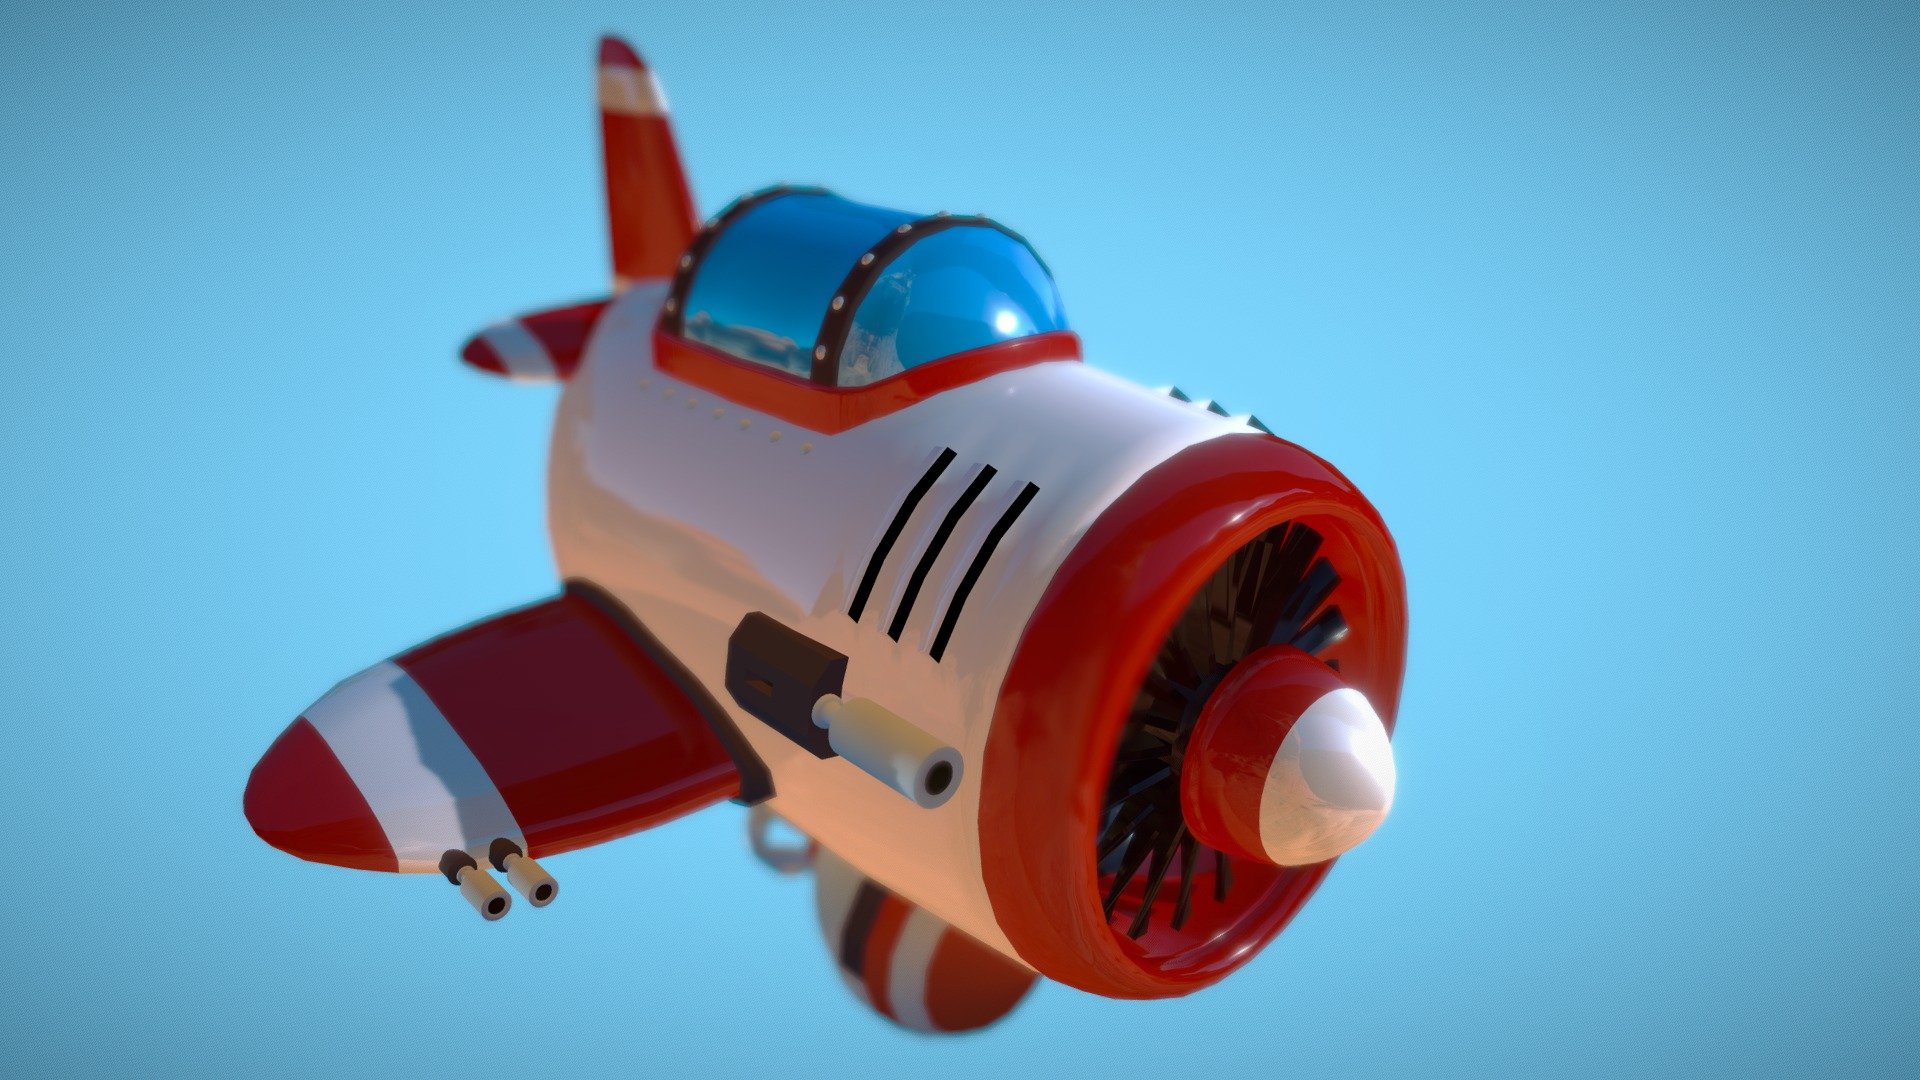 Cartoon-style plane, modeled in Maya, has
a light mesh and ready to be animated and
sported for game engines. Does not contain animation 3d model